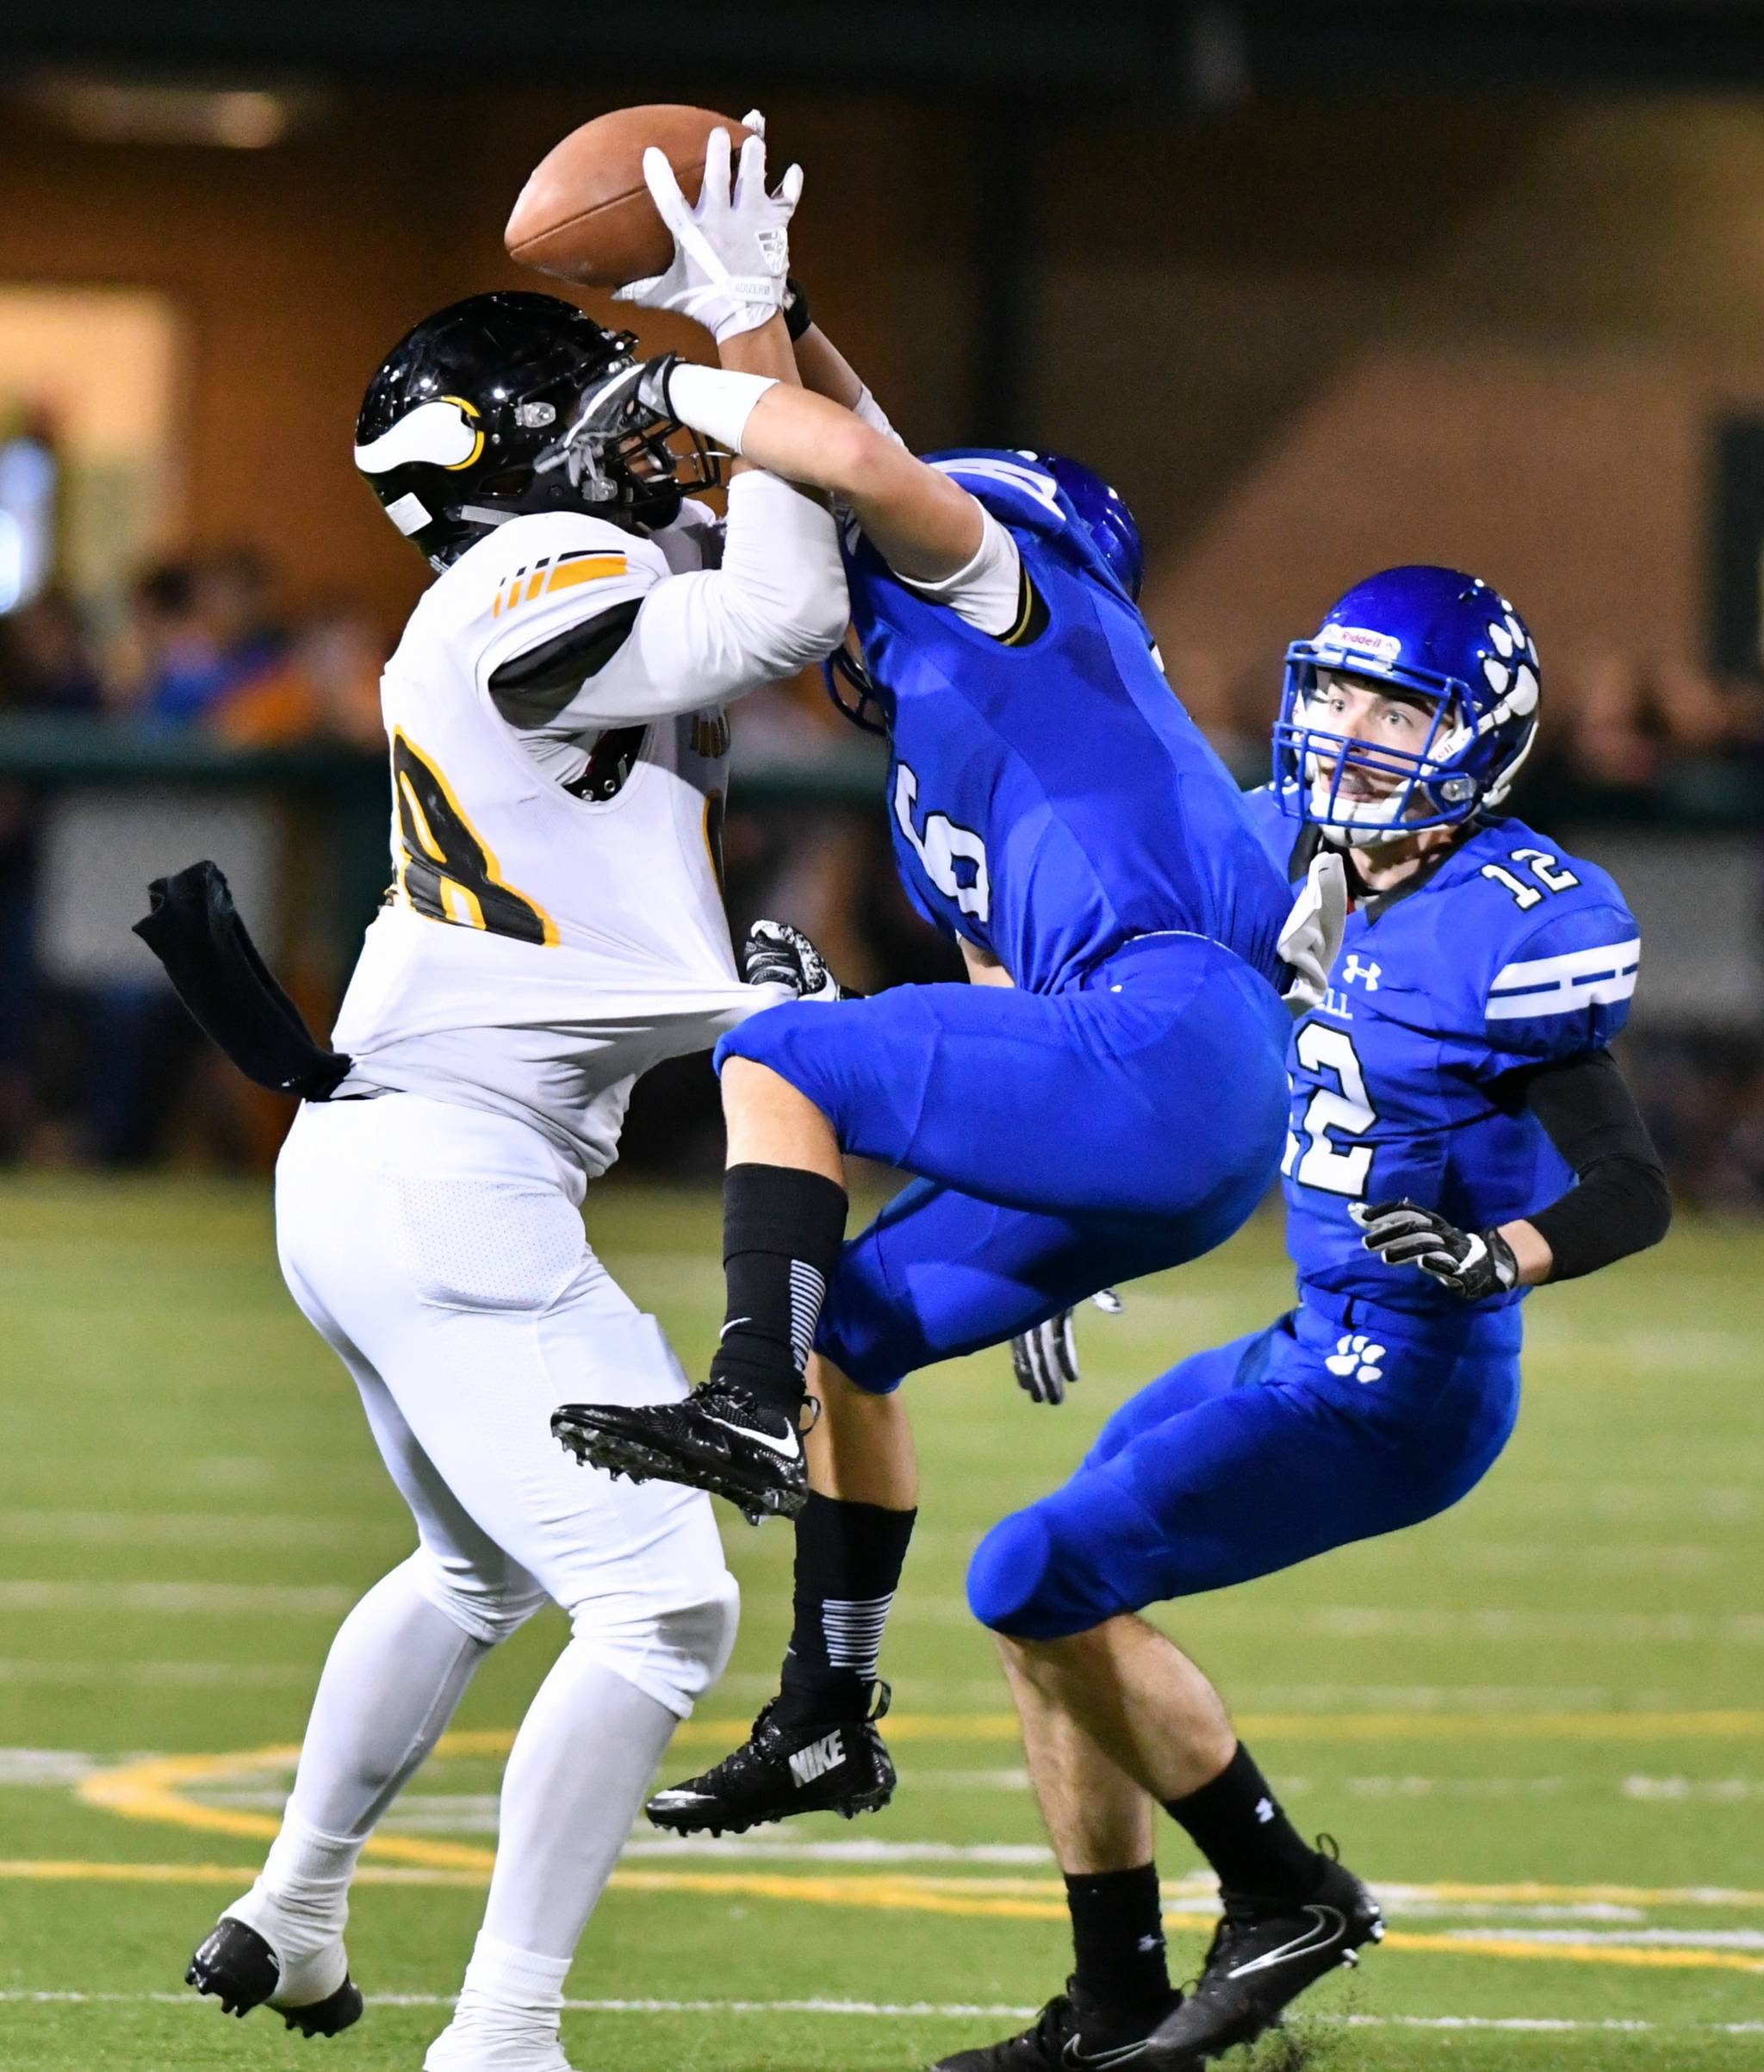 Inglemoor’s Quentin Moore, left, battles for the ball with Bothell’s Riley Morrison. Also pictured is Bothell’s Mason Locknane. Greg Nelson photo